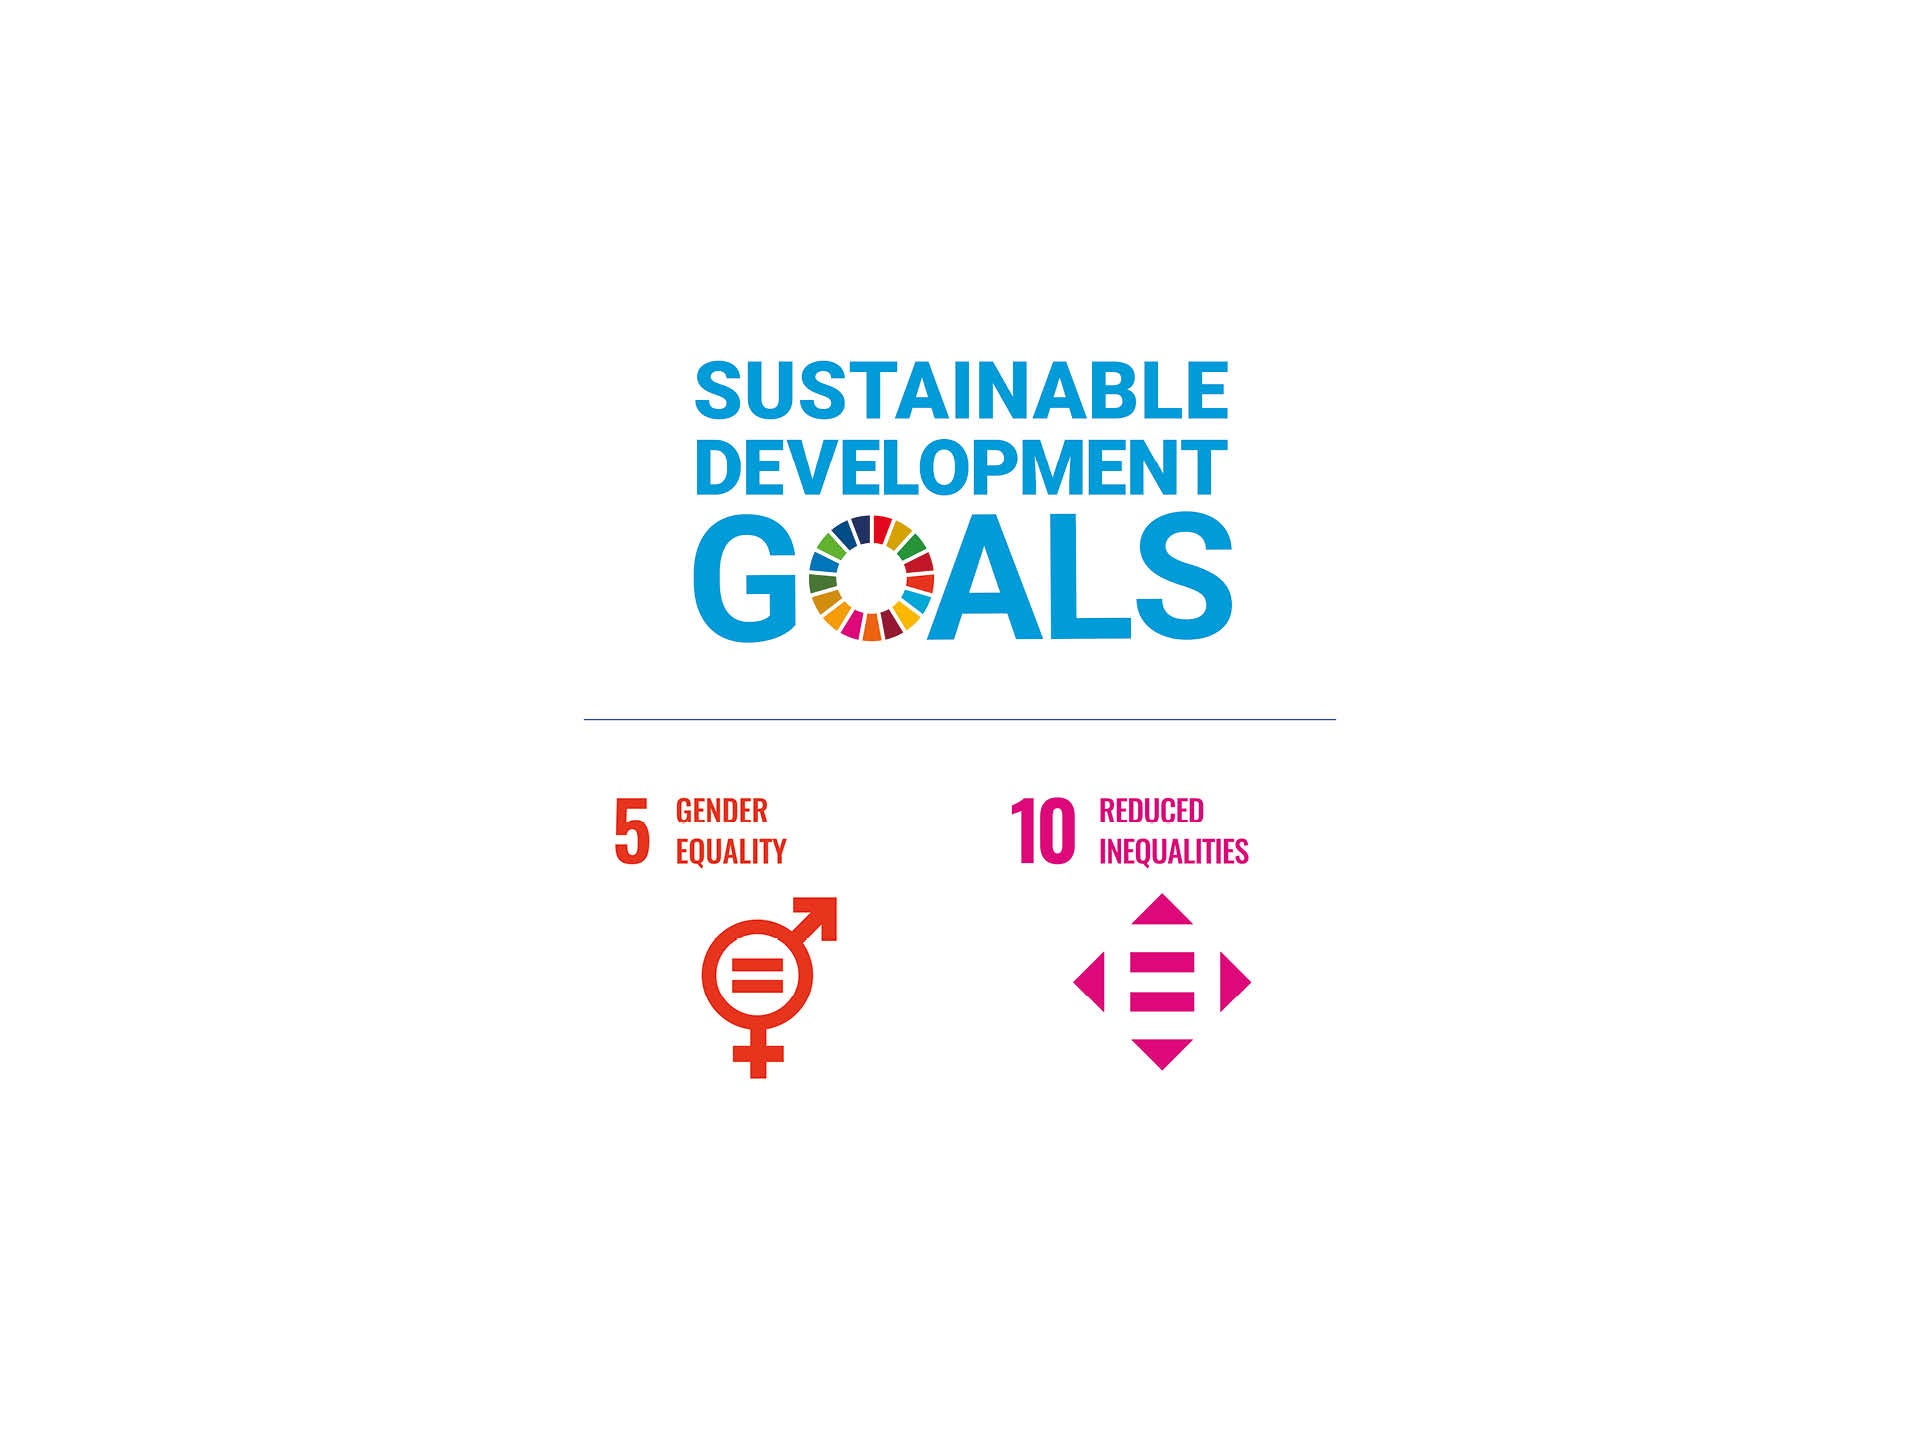 United Nations’ Sustainable Development Goals 5 and 10